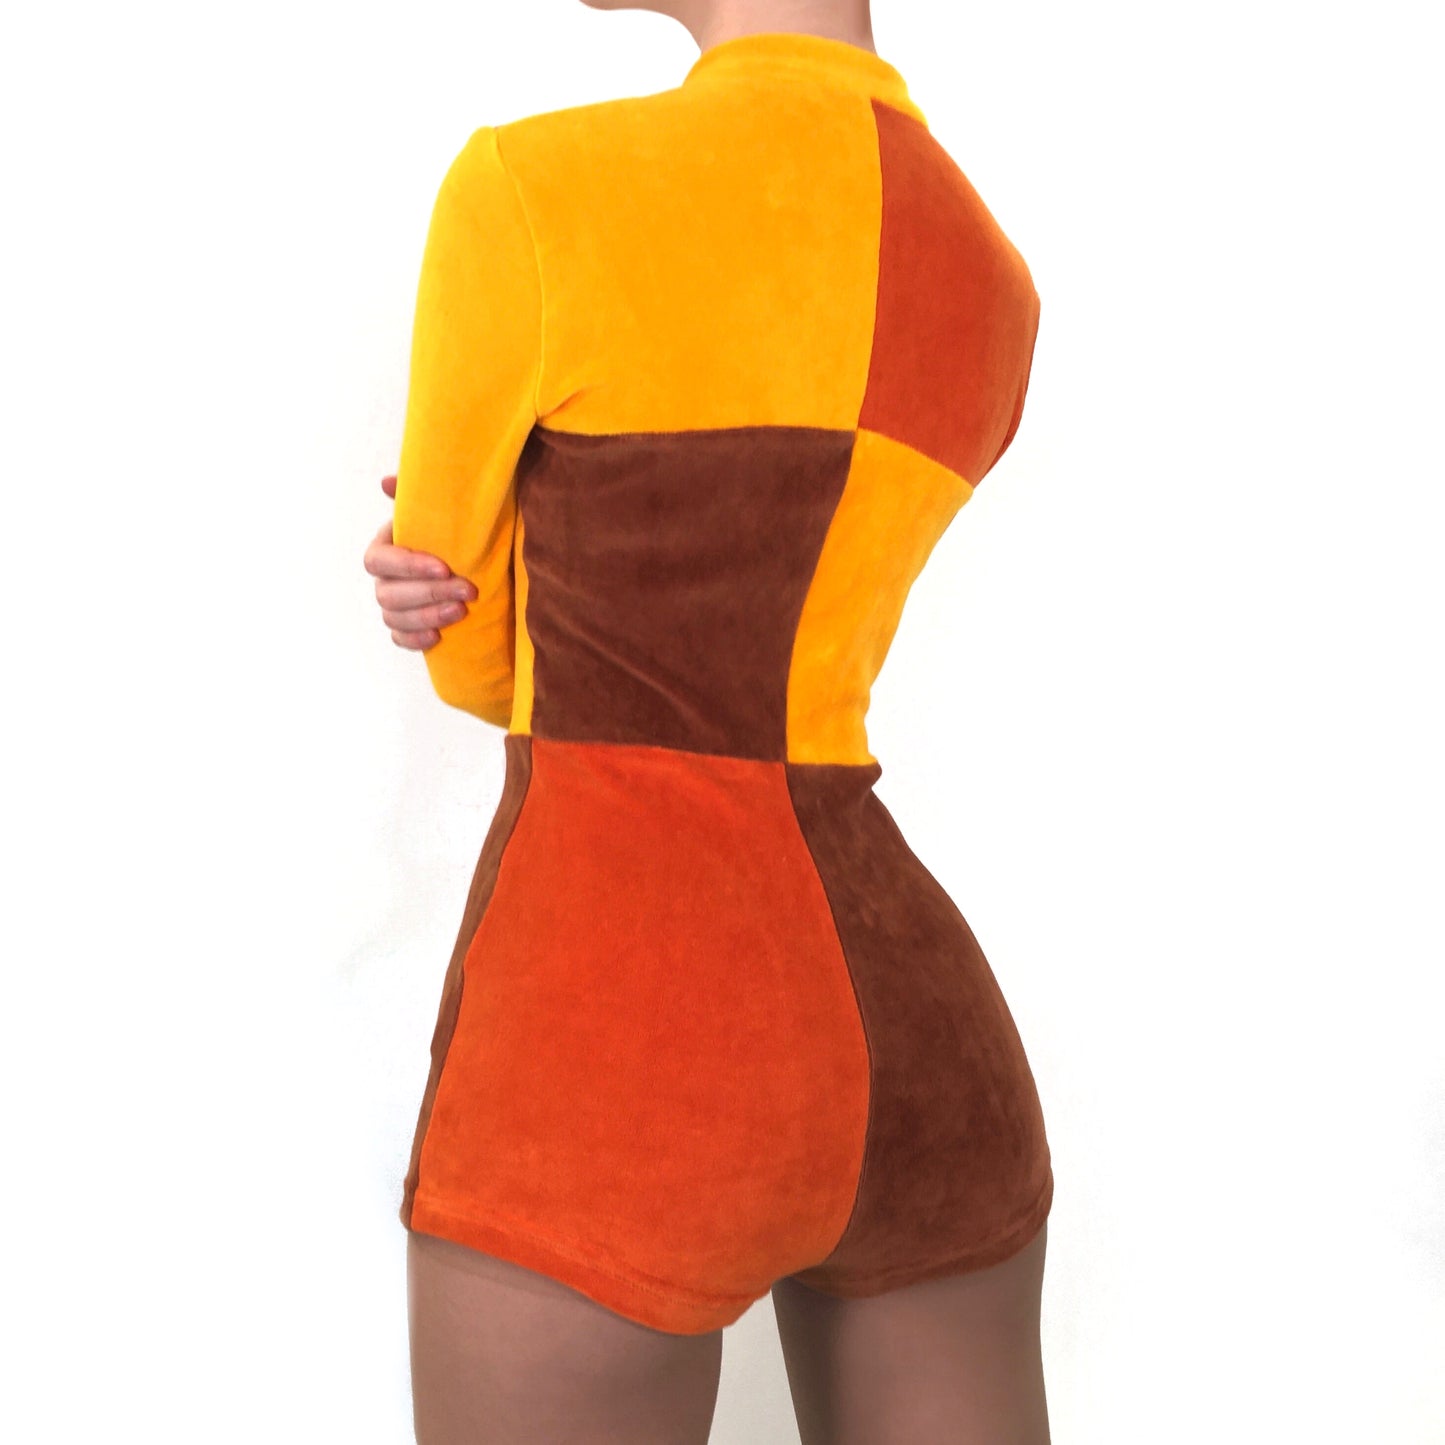 The Velvet Colour Block Playsuit in Lady Marmalade